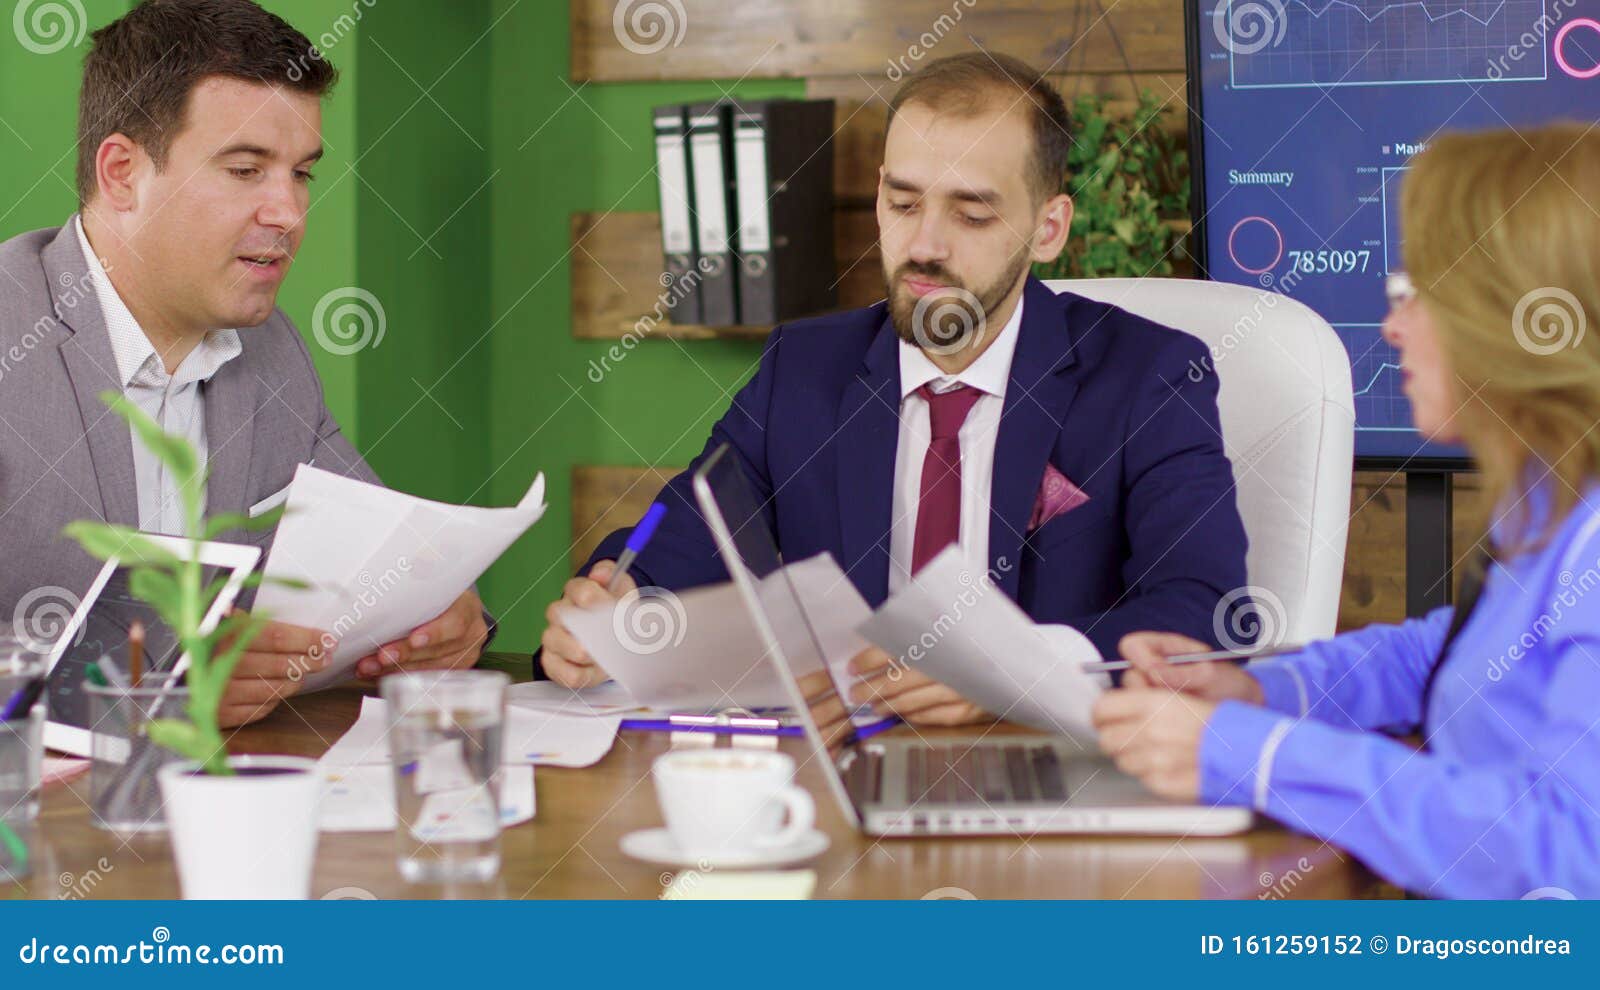 Bearded Team Leader In Business Suit Having A Meeting With His